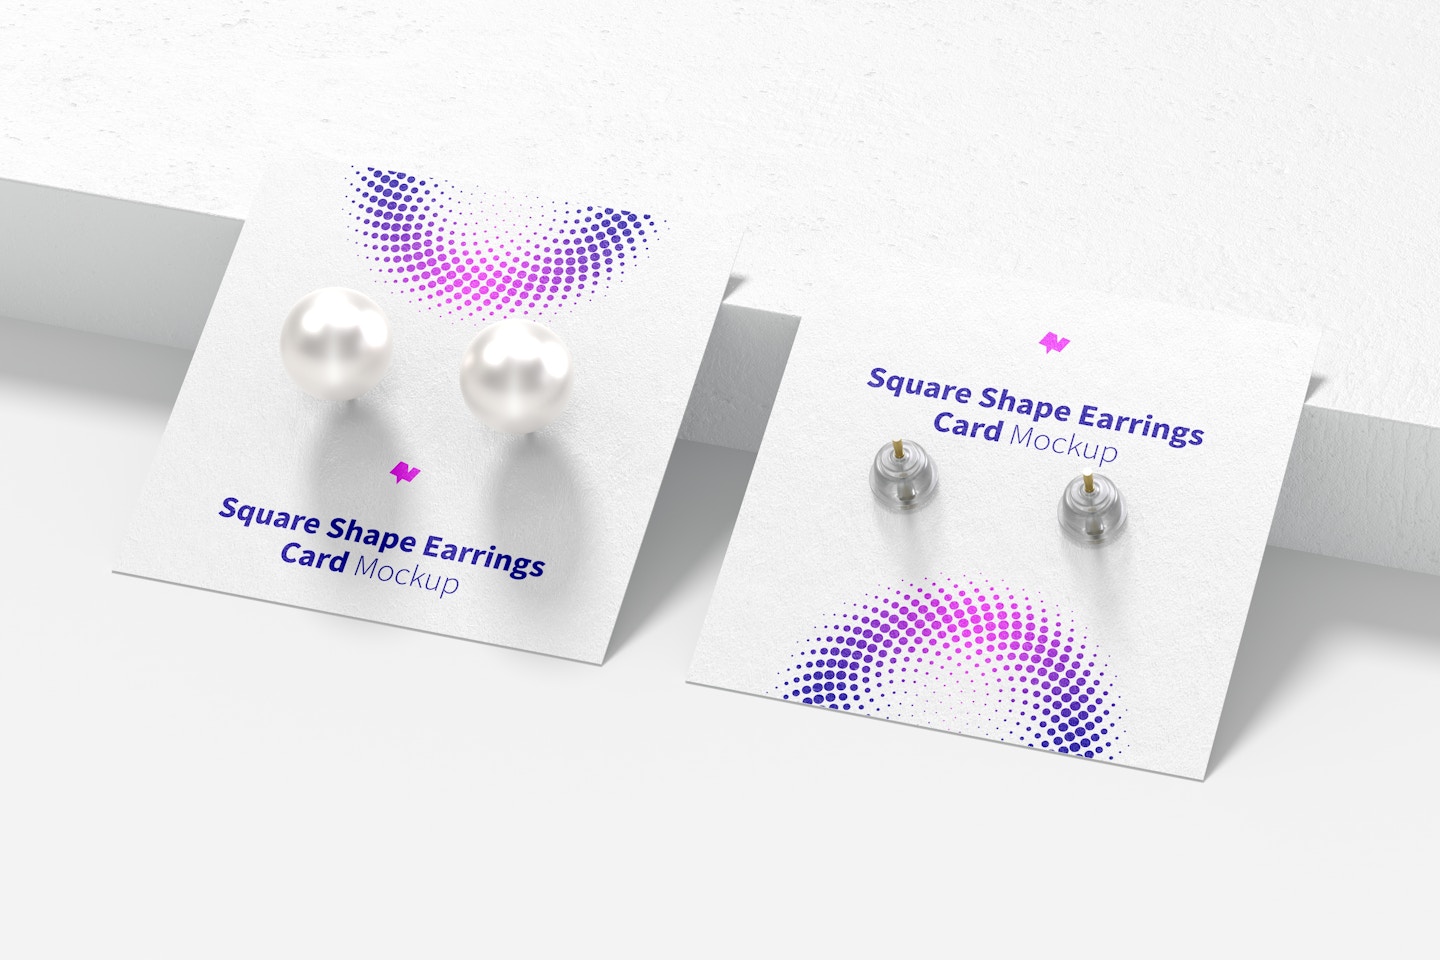 Square Shape Earrings Card Mockup, Front and Behind